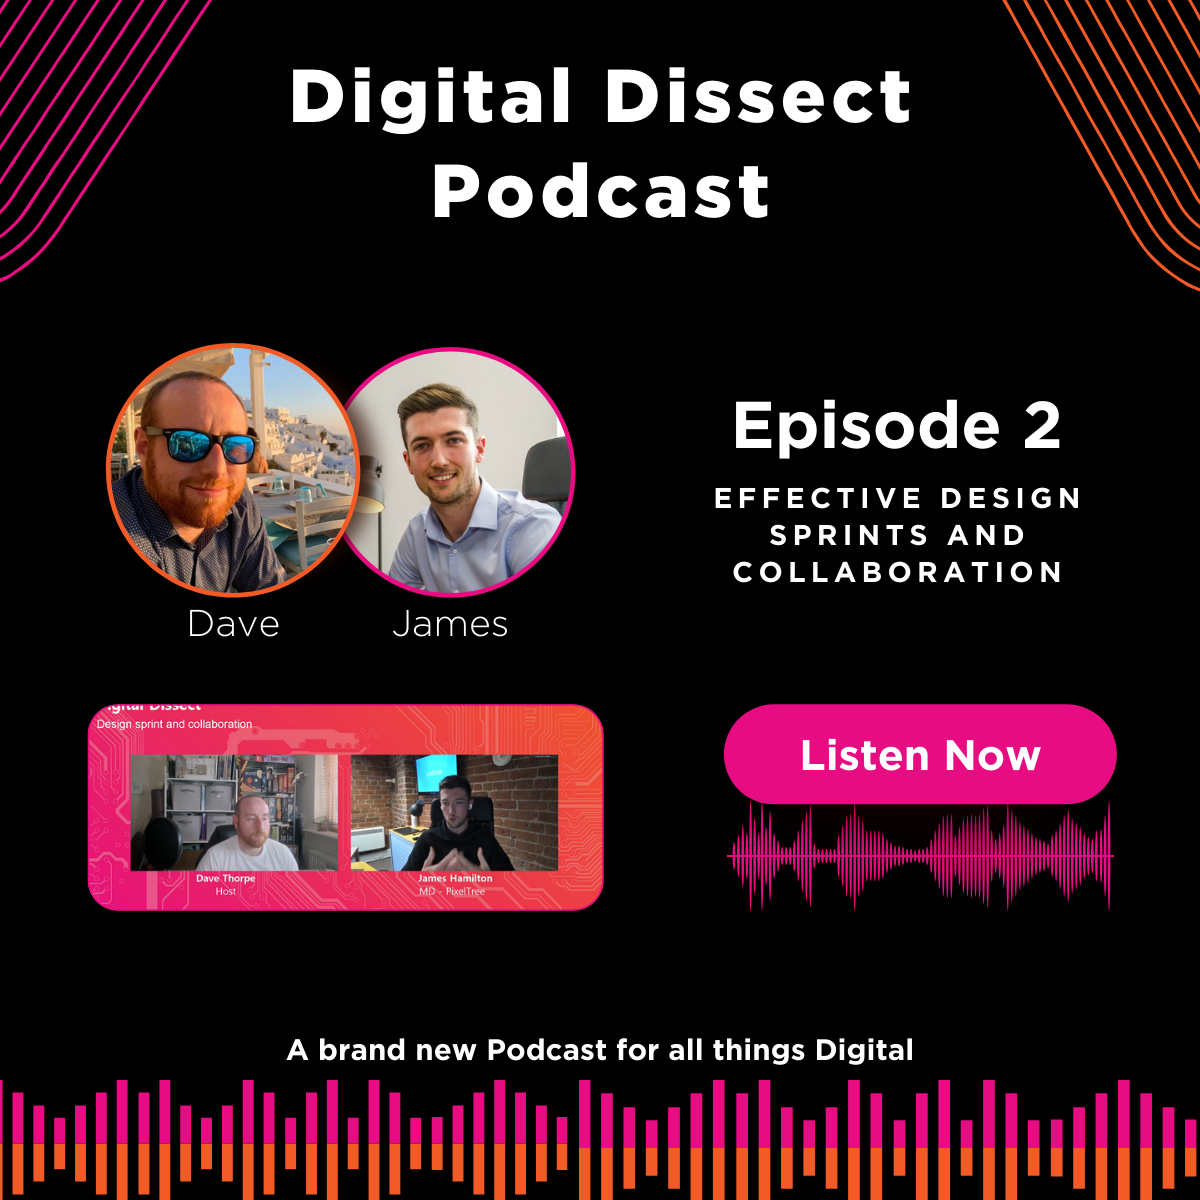 Digital Dissect Episode 2 -  Successful design sprints and collaboration with James from PixelTree